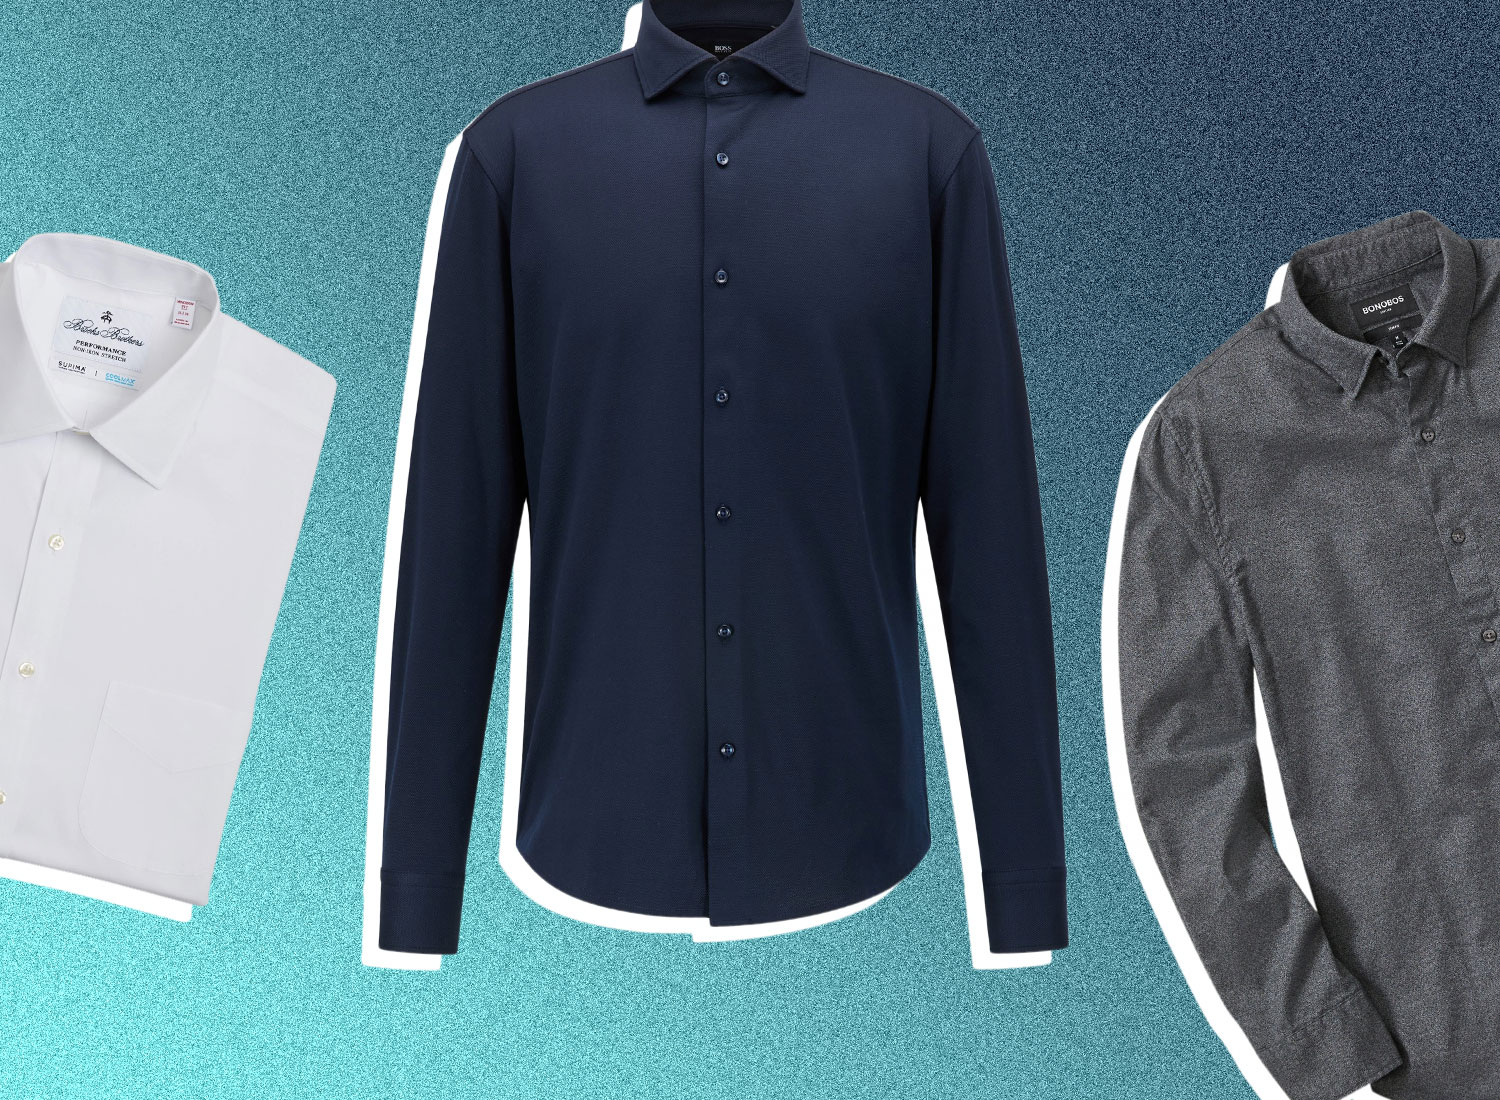 22 Best Button Up Shirts For Relaxed Casual Style